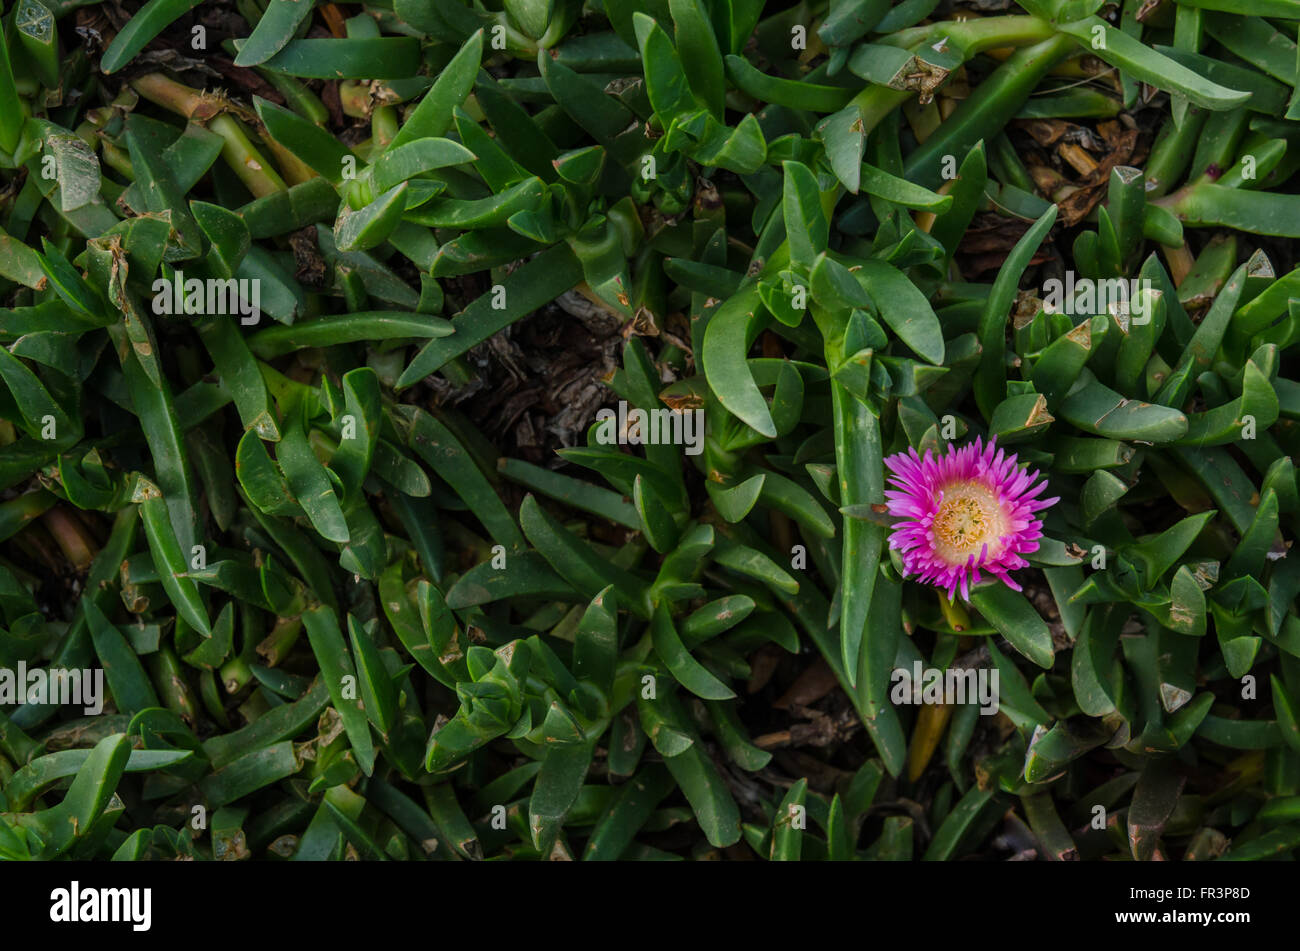 Single pink flower in green stems background image Stock Photo